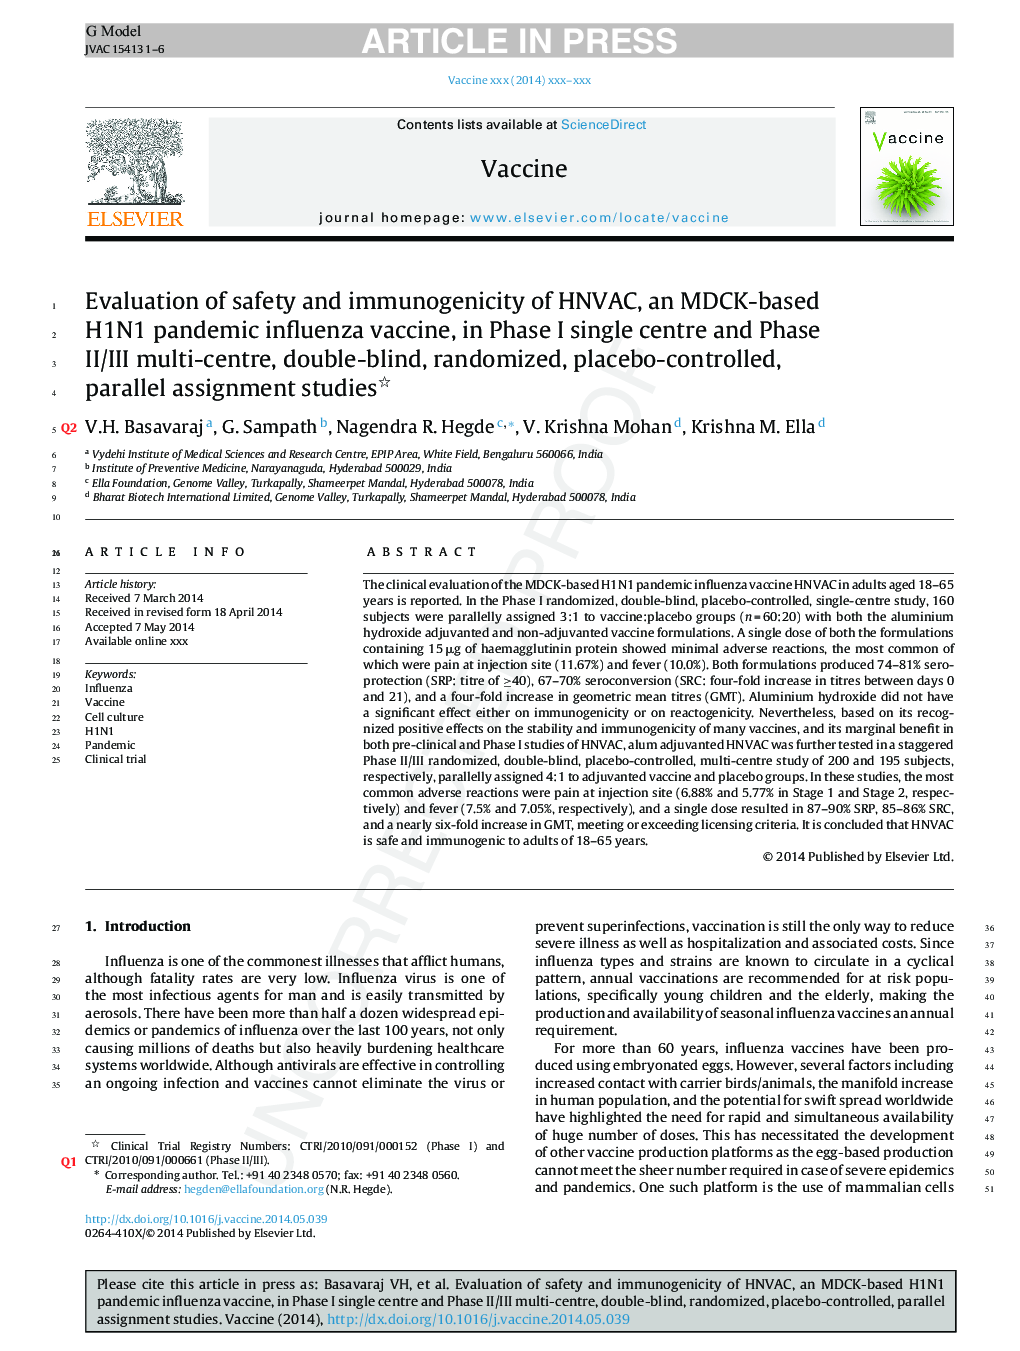 Evaluation of safety and immunogenicity of HNVAC, an MDCK-based H1N1 pandemic influenza vaccine, in Phase I single centre and Phase II/III multi-centre, double-blind, randomized, placebo-controlled, parallel assignment studies